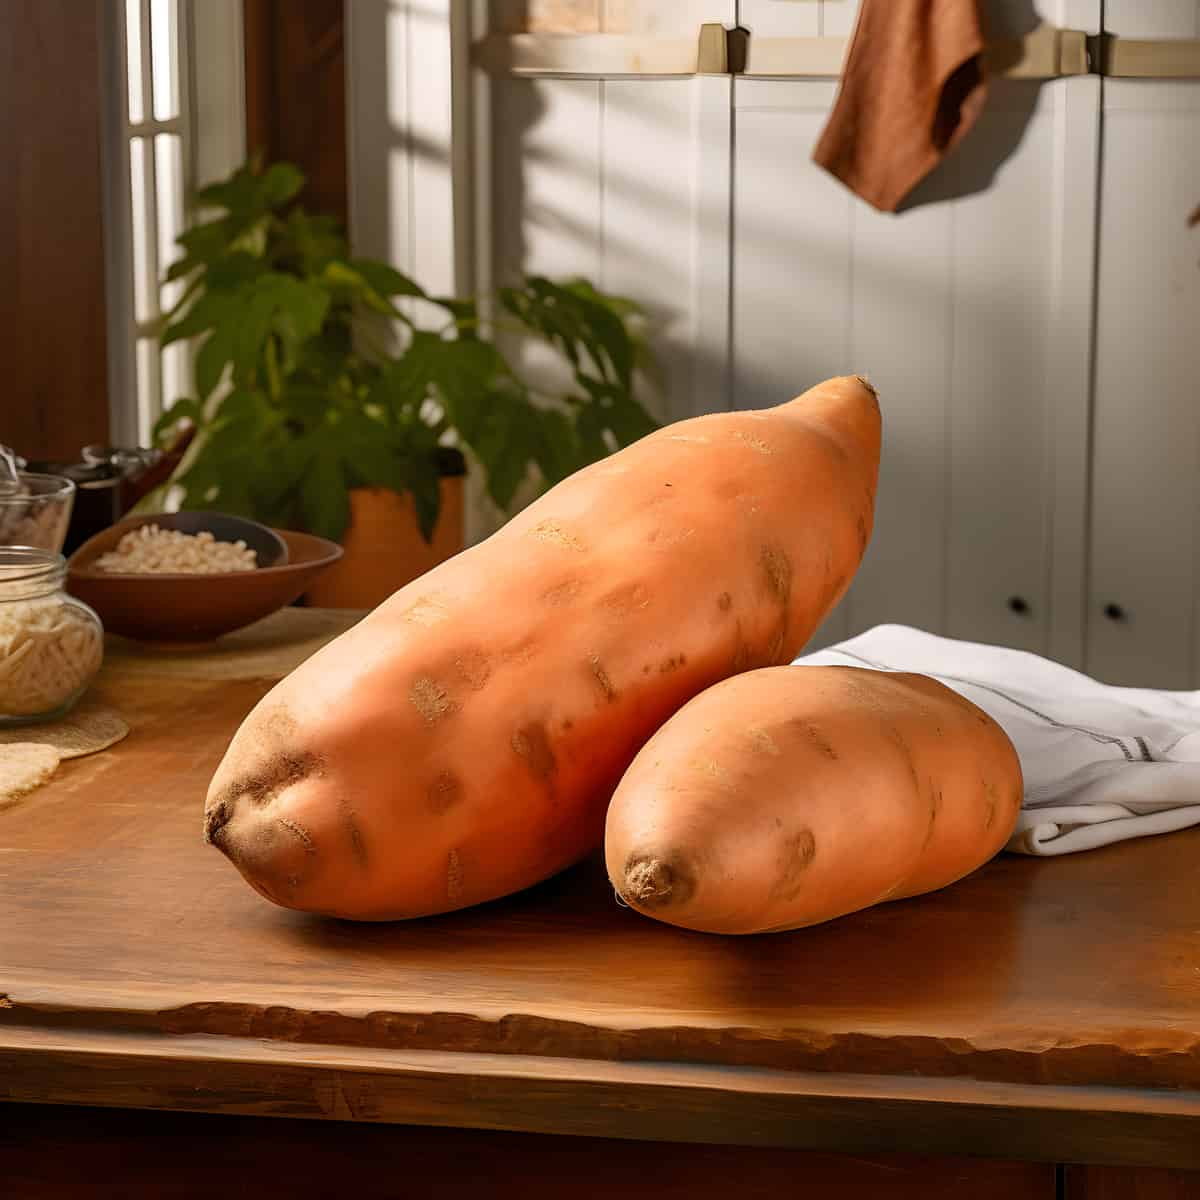 Virginian Or V Sweet Potatoes on a kitchen counter